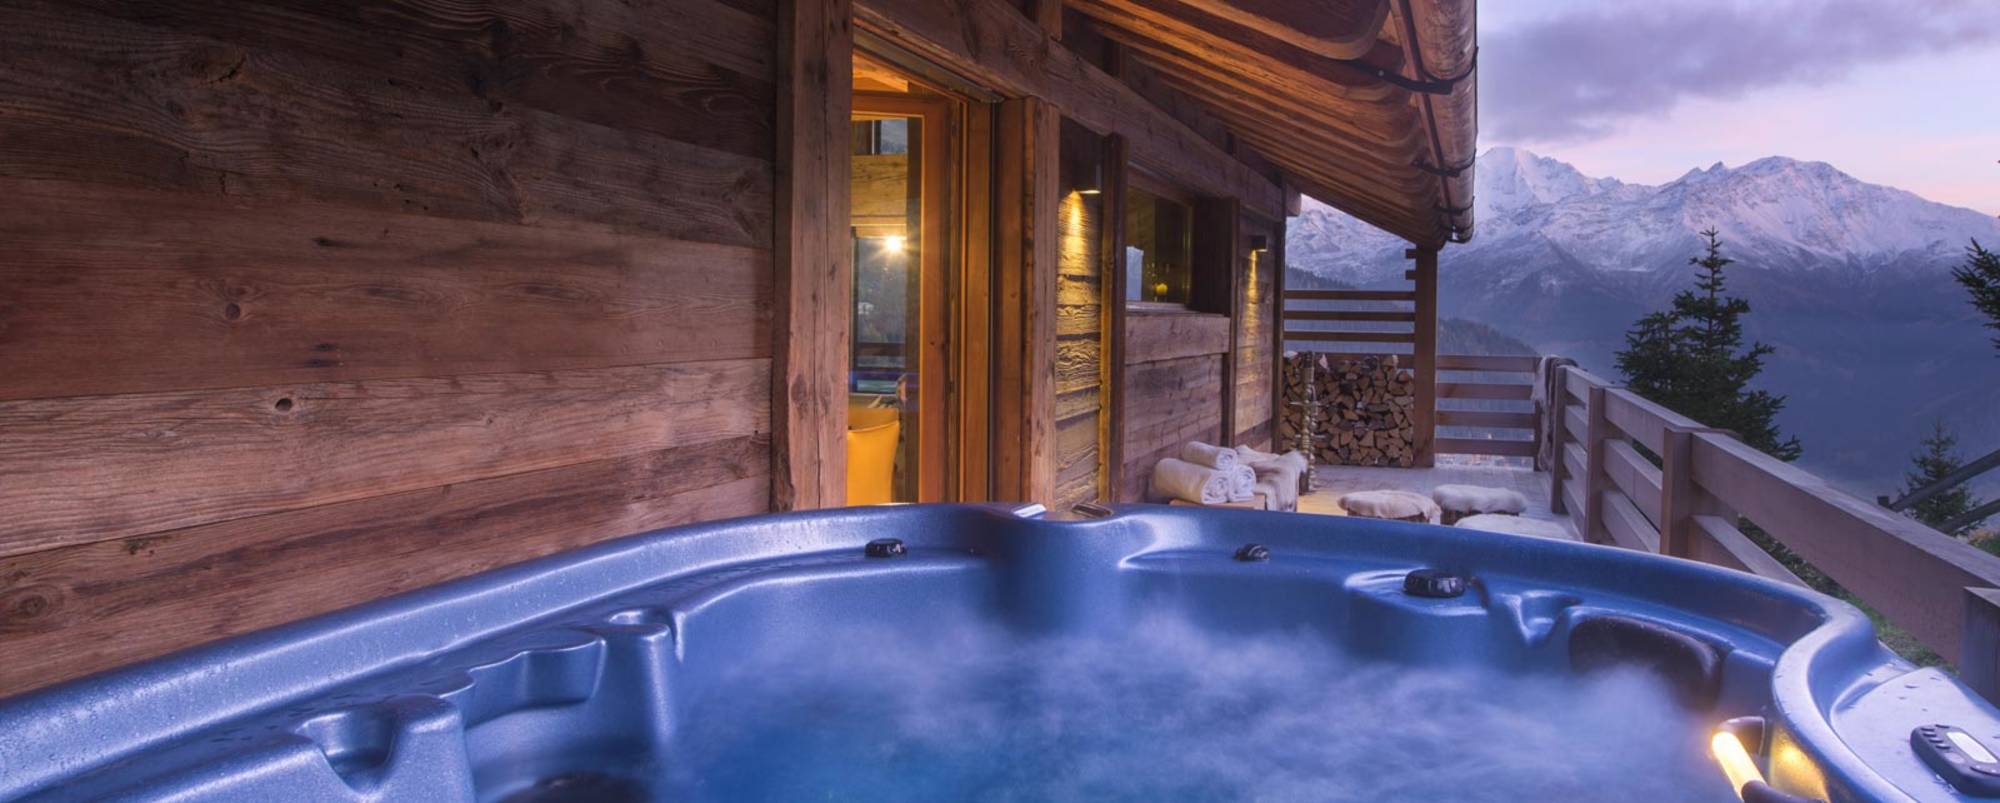 Boutique ski lodge reviews with hot tubs